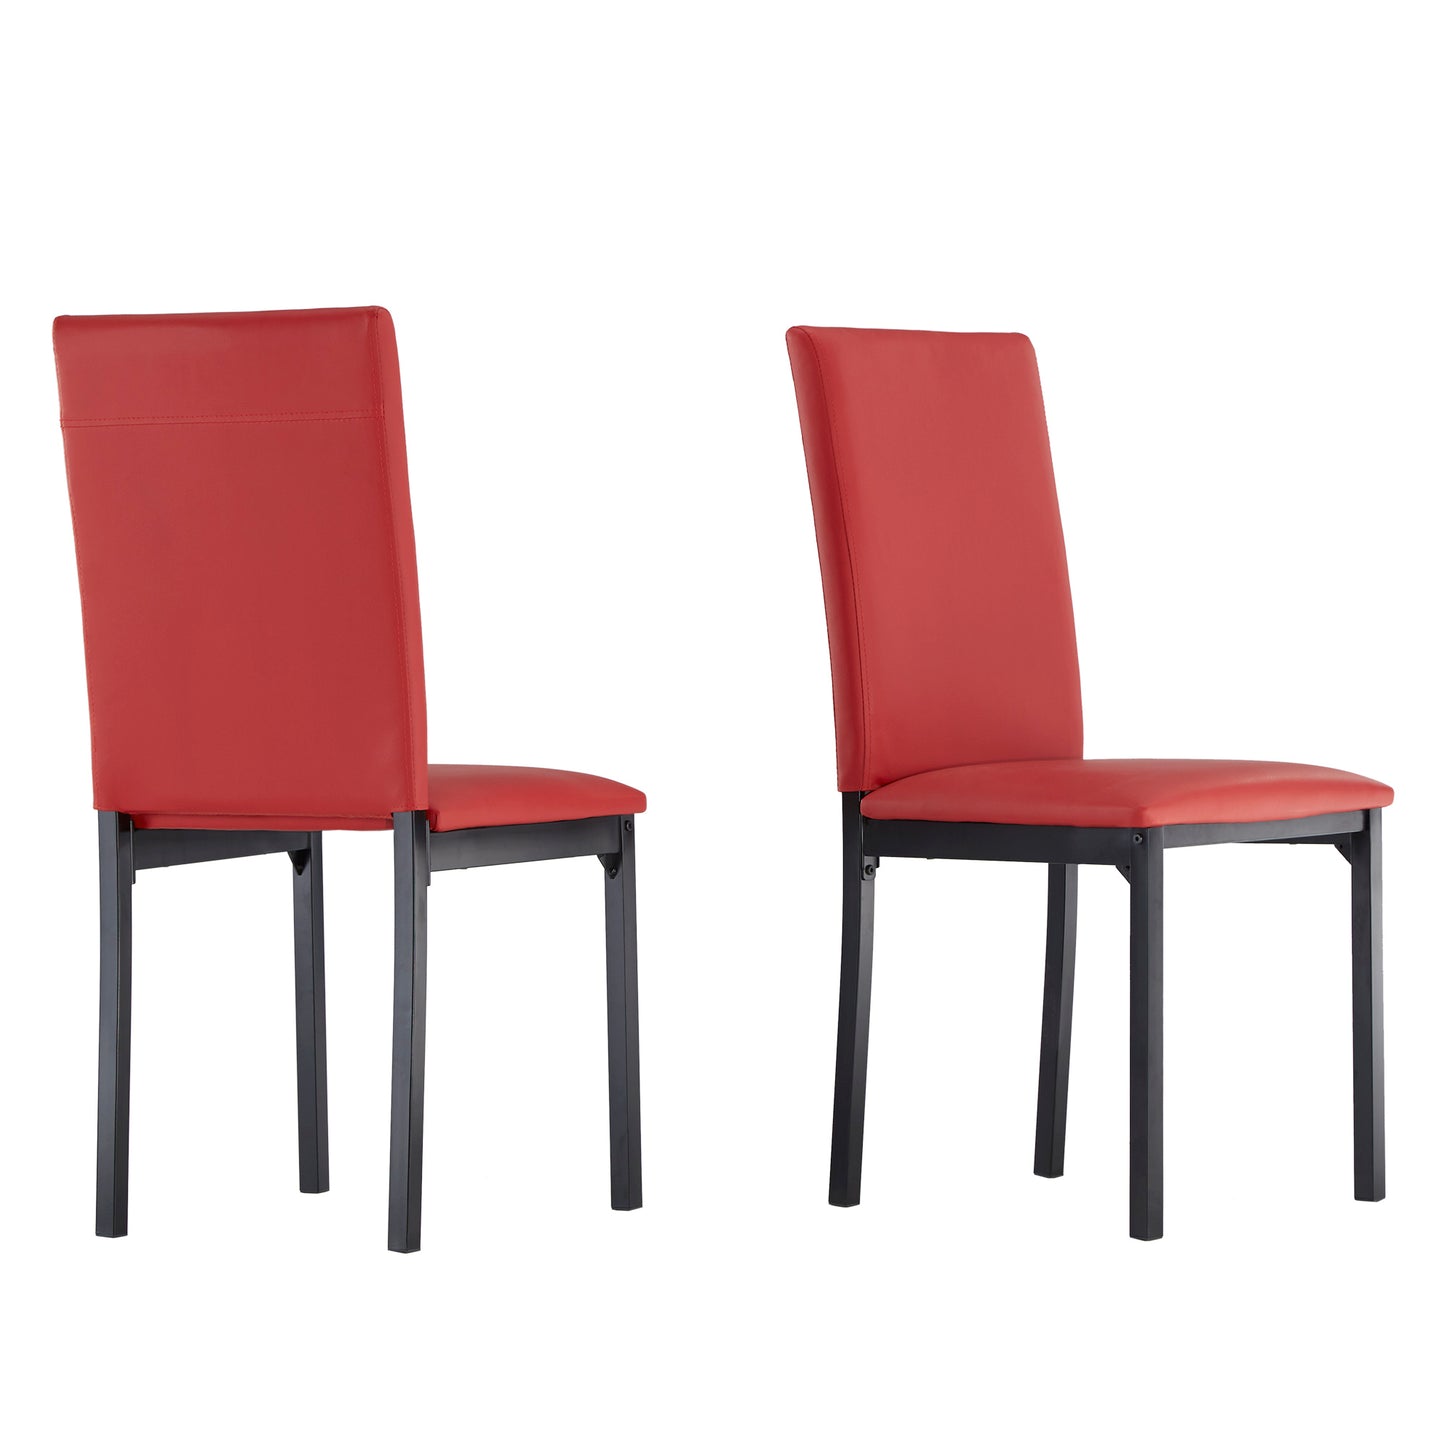 Metal Upholstered Dining Chairs - Red Faux Leather, Set of 2